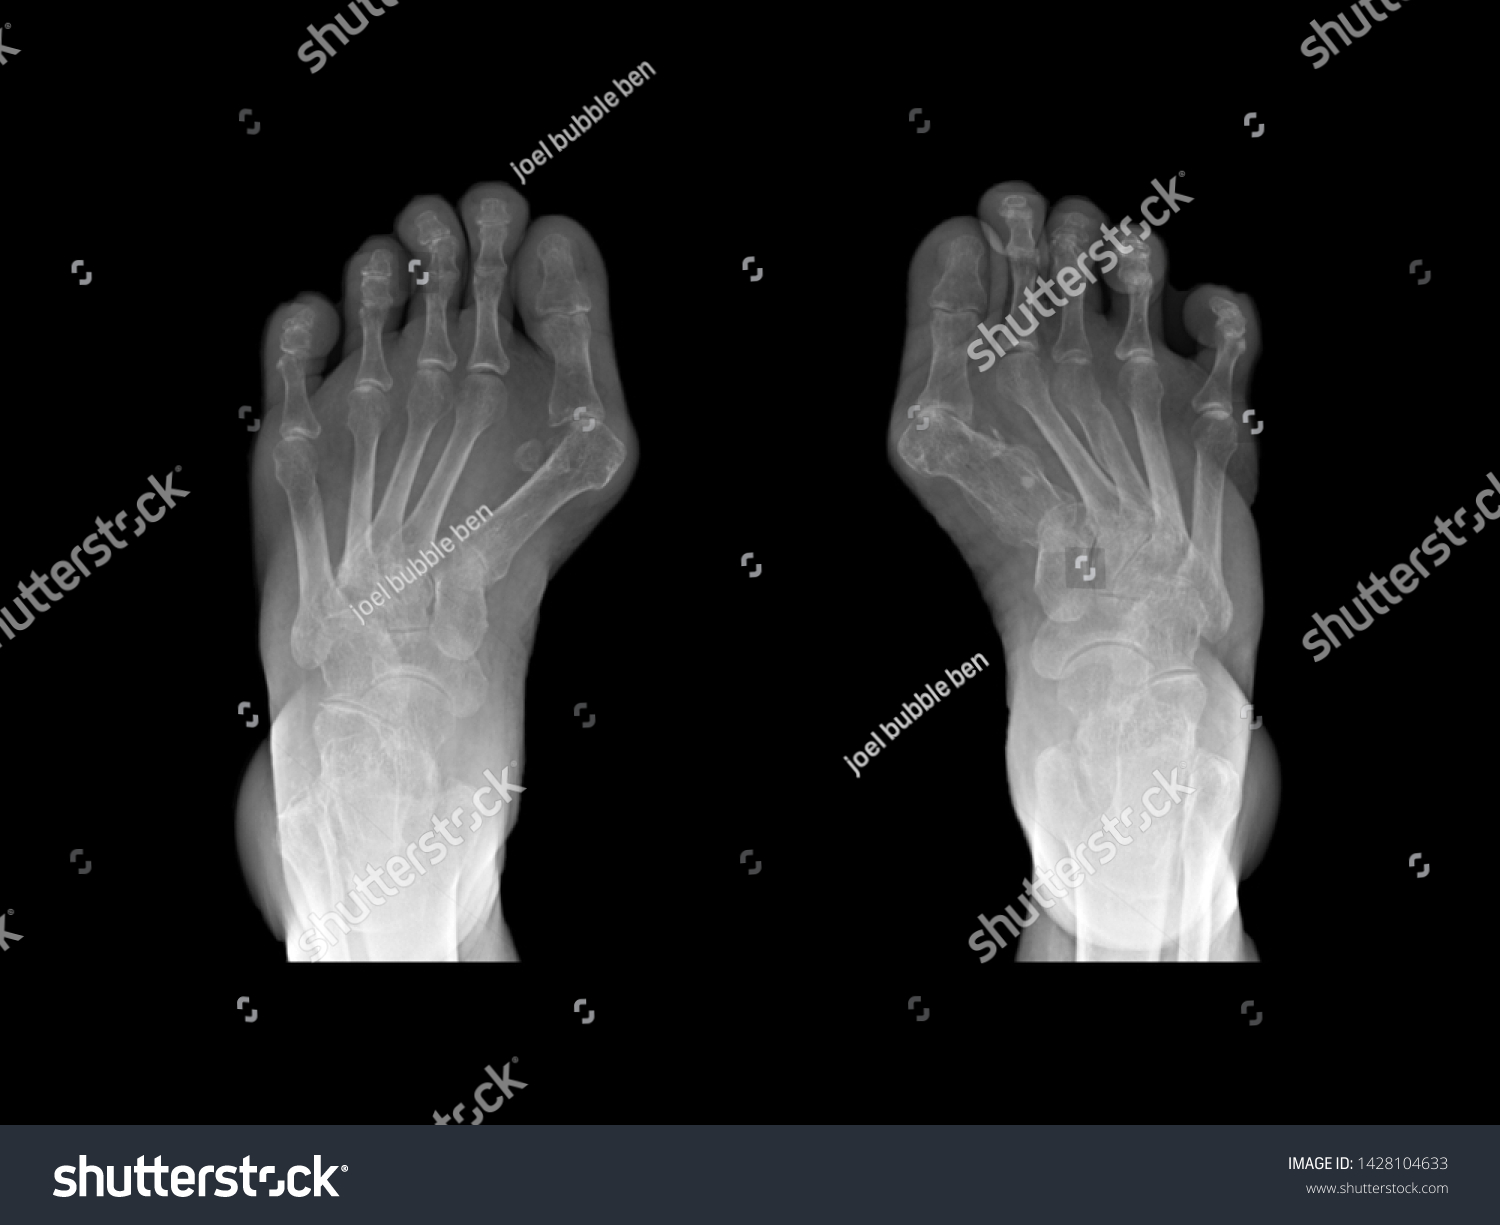 Film Xray Foot Radiograph Show Both Stock Photo 1428104633 | Shutterstock